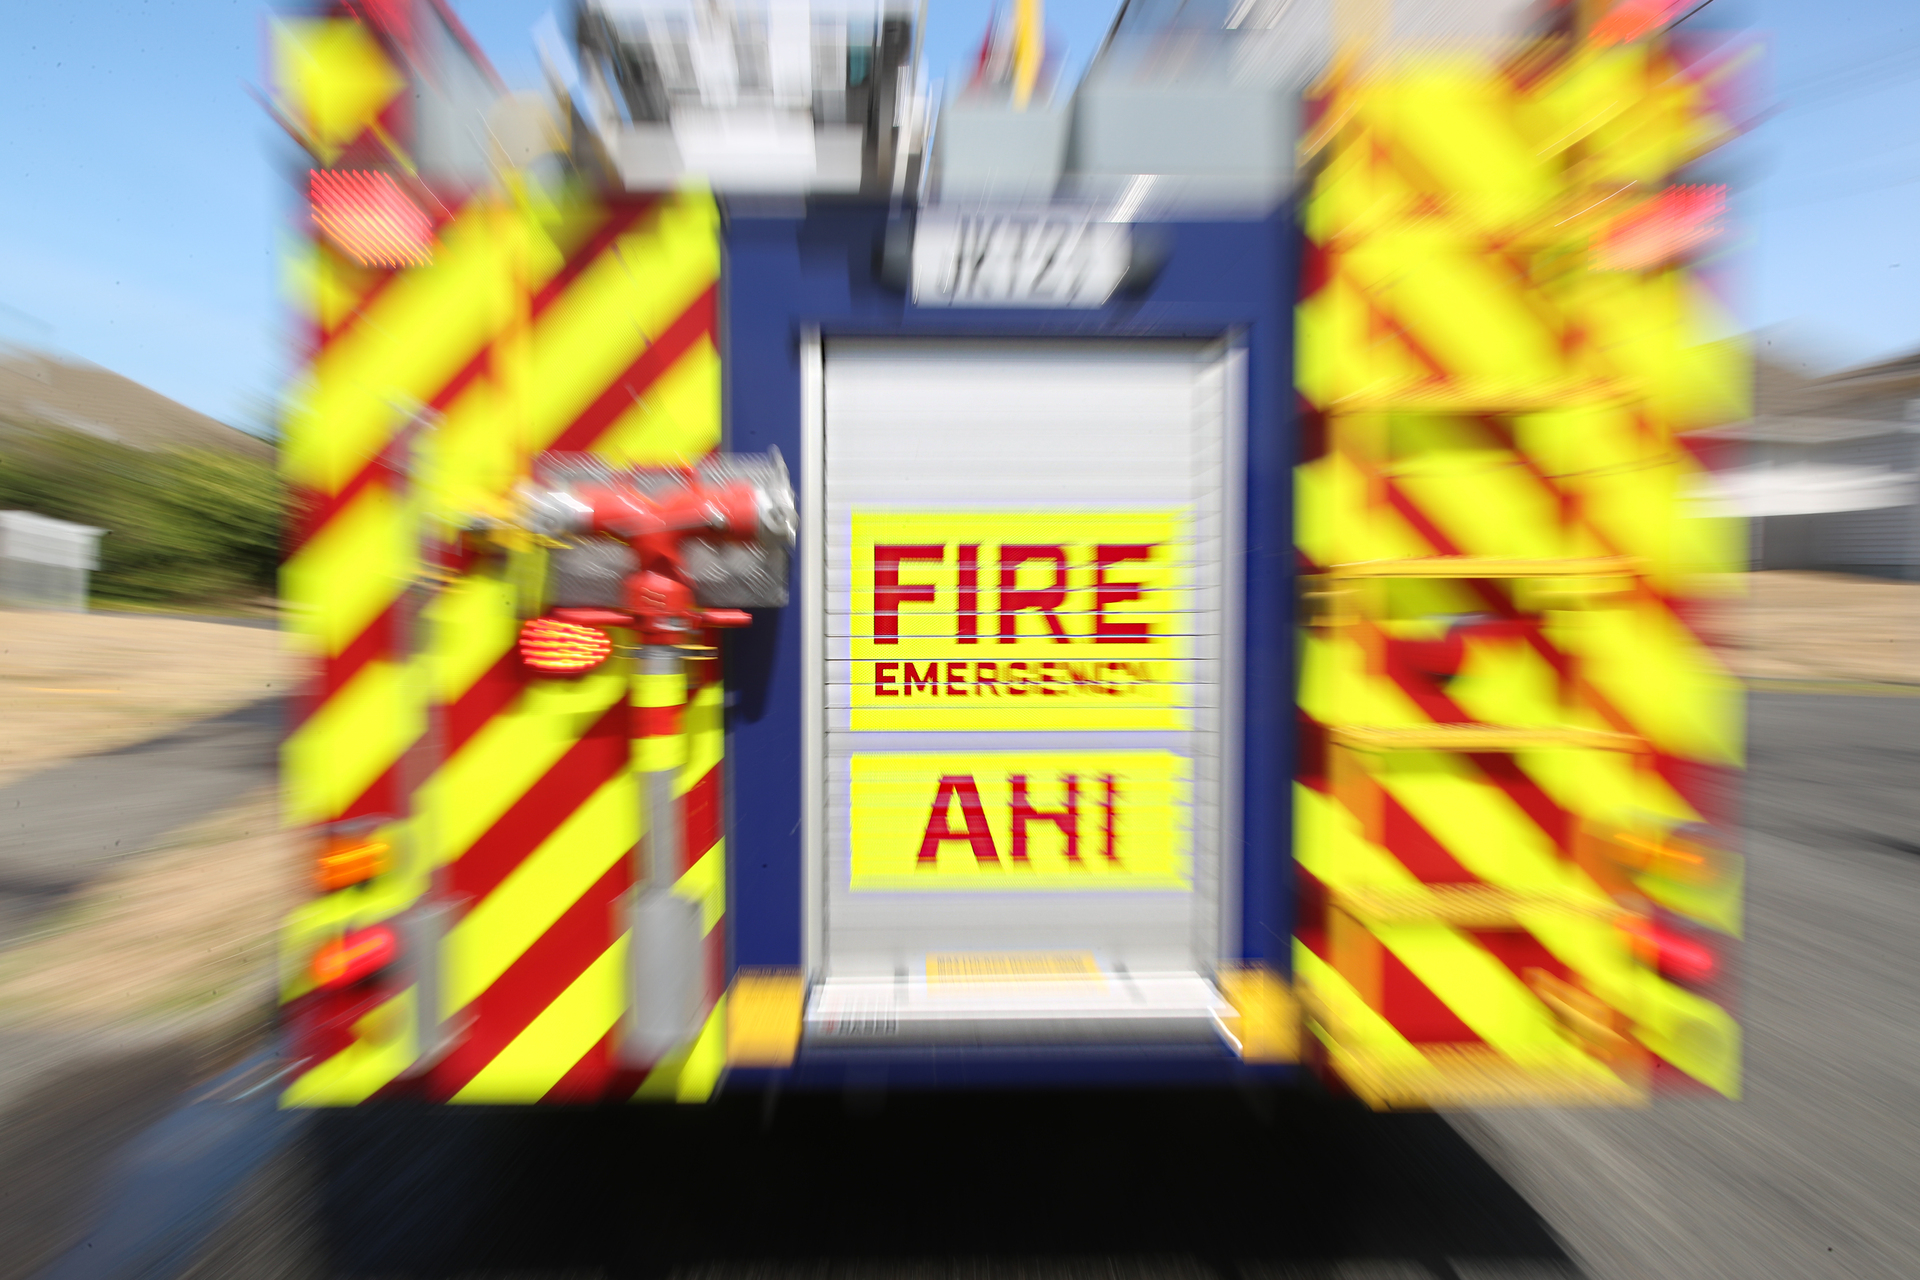 Well-involved' house fire in Auckland's Massey - NZ Herald